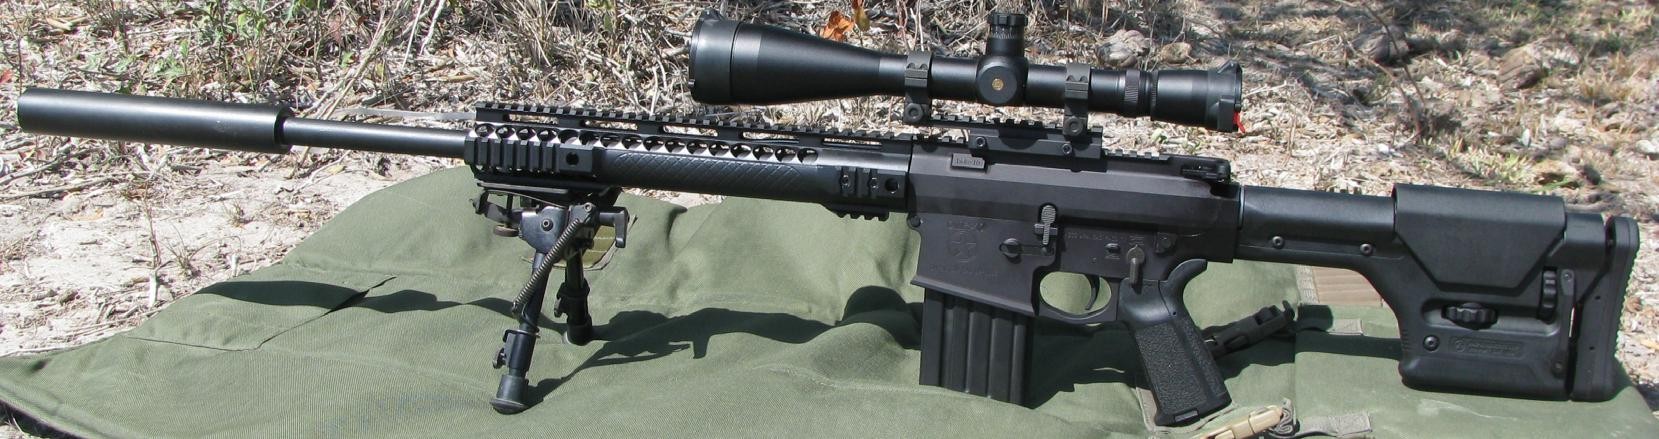 Better Business Bureau: online zombie-killer rifles and silencers slow to come